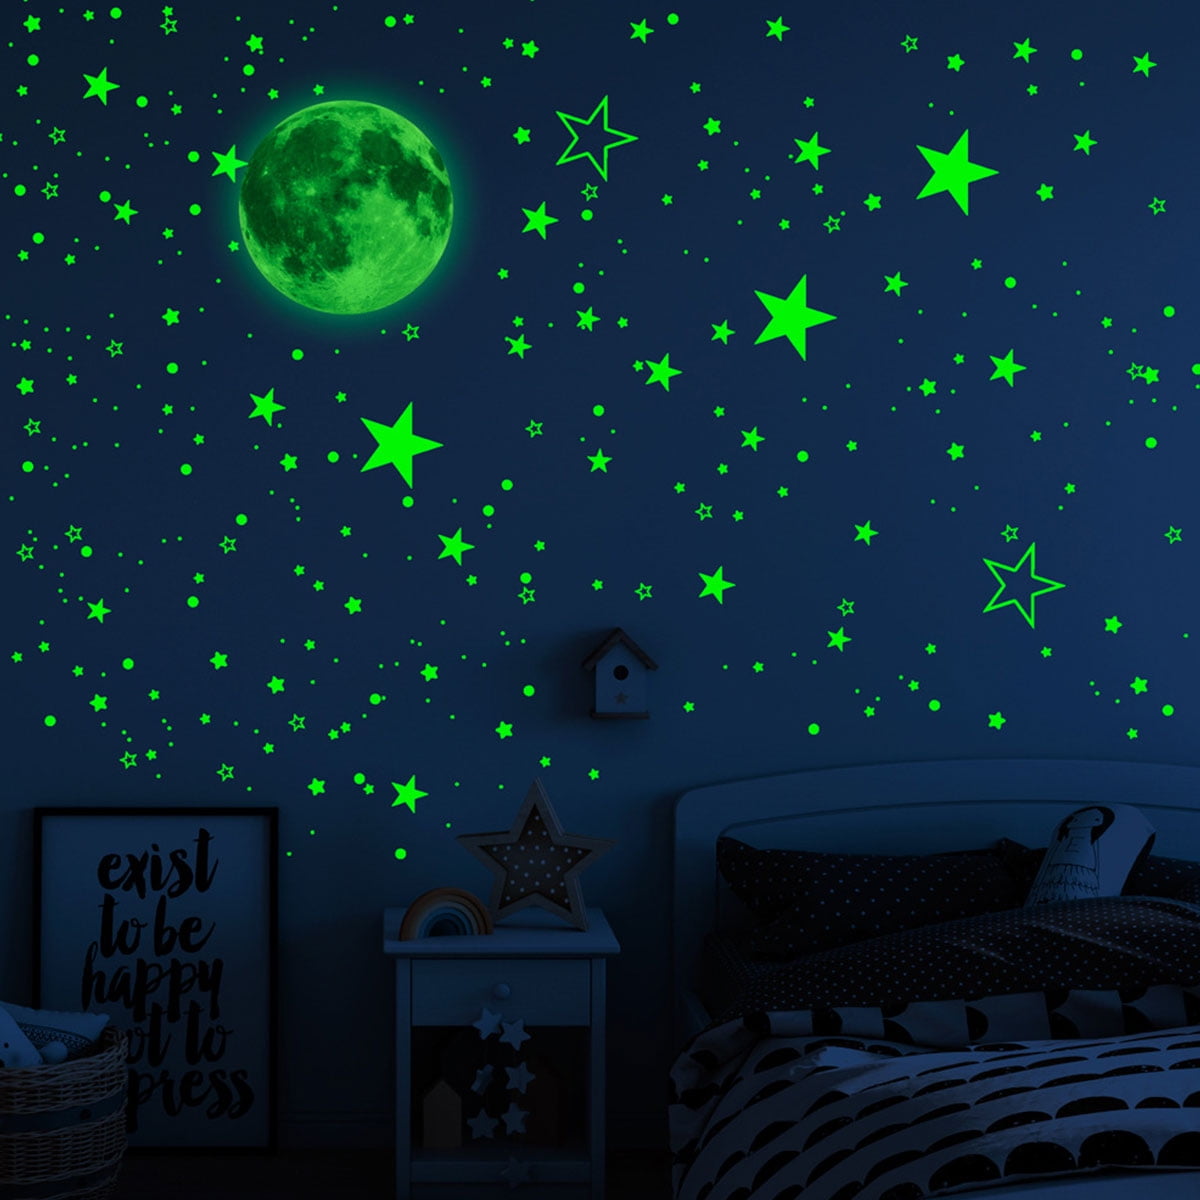 Kids Rooms Decorations Glow In The Dark Stars Wall Stickers Decals Moon 252 Dots 